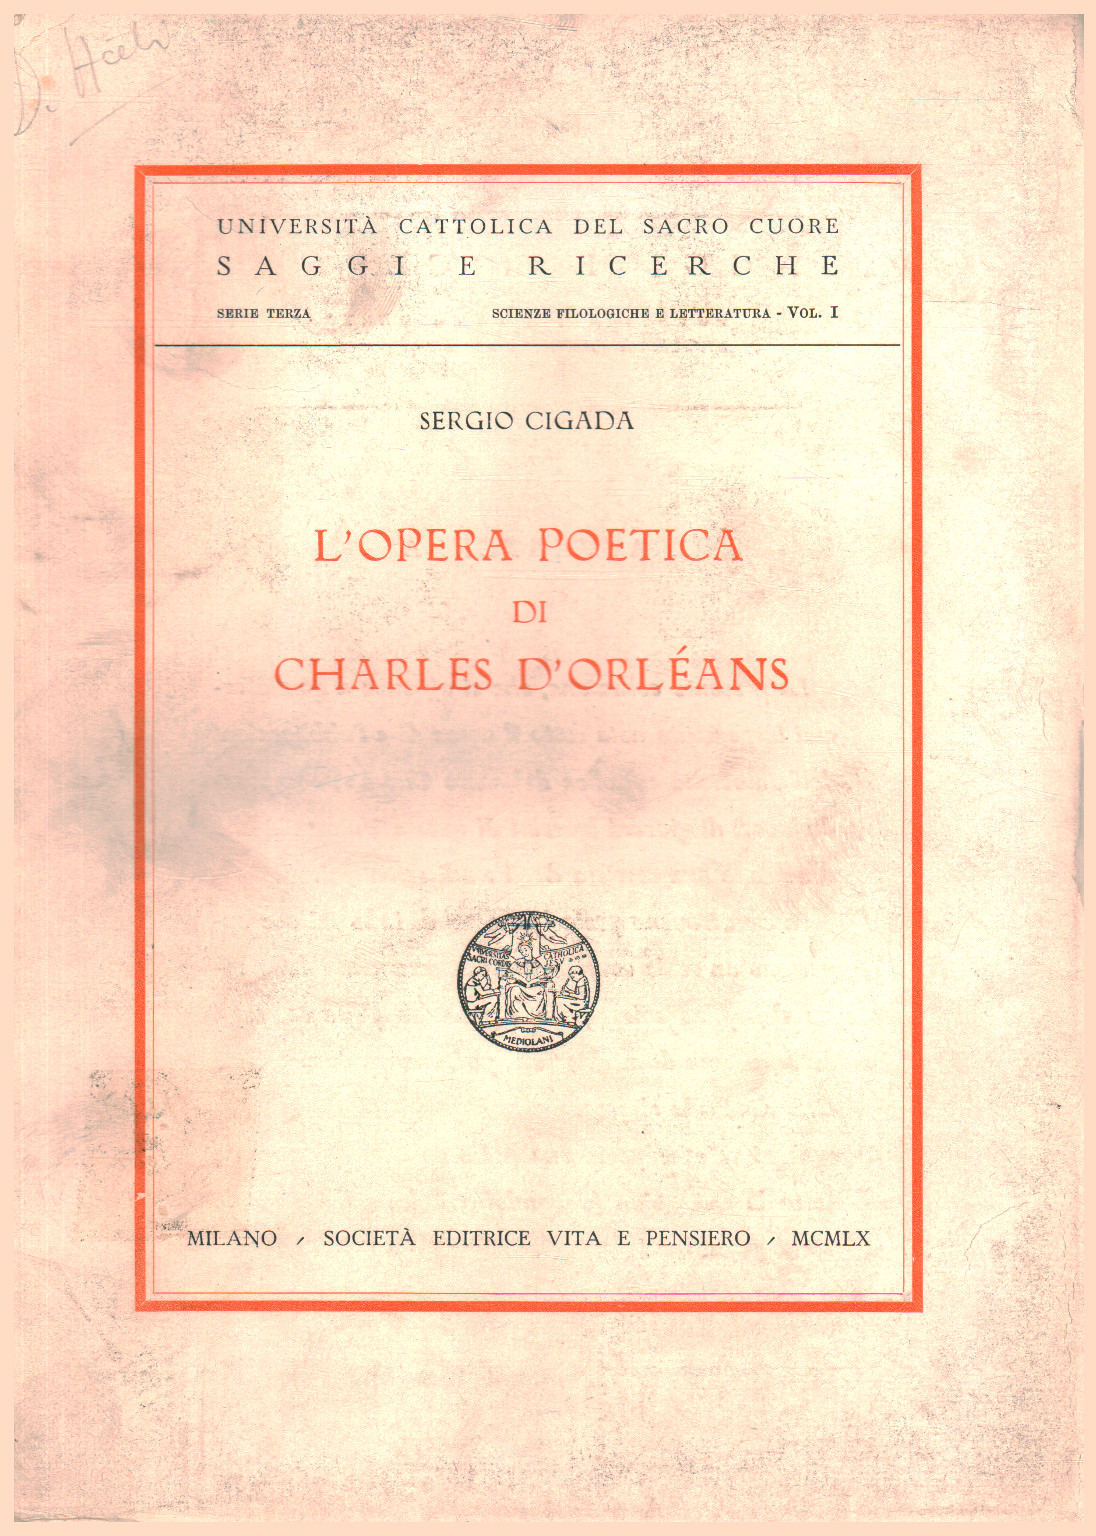 L poetical works of Charles d'orléans, s.a.